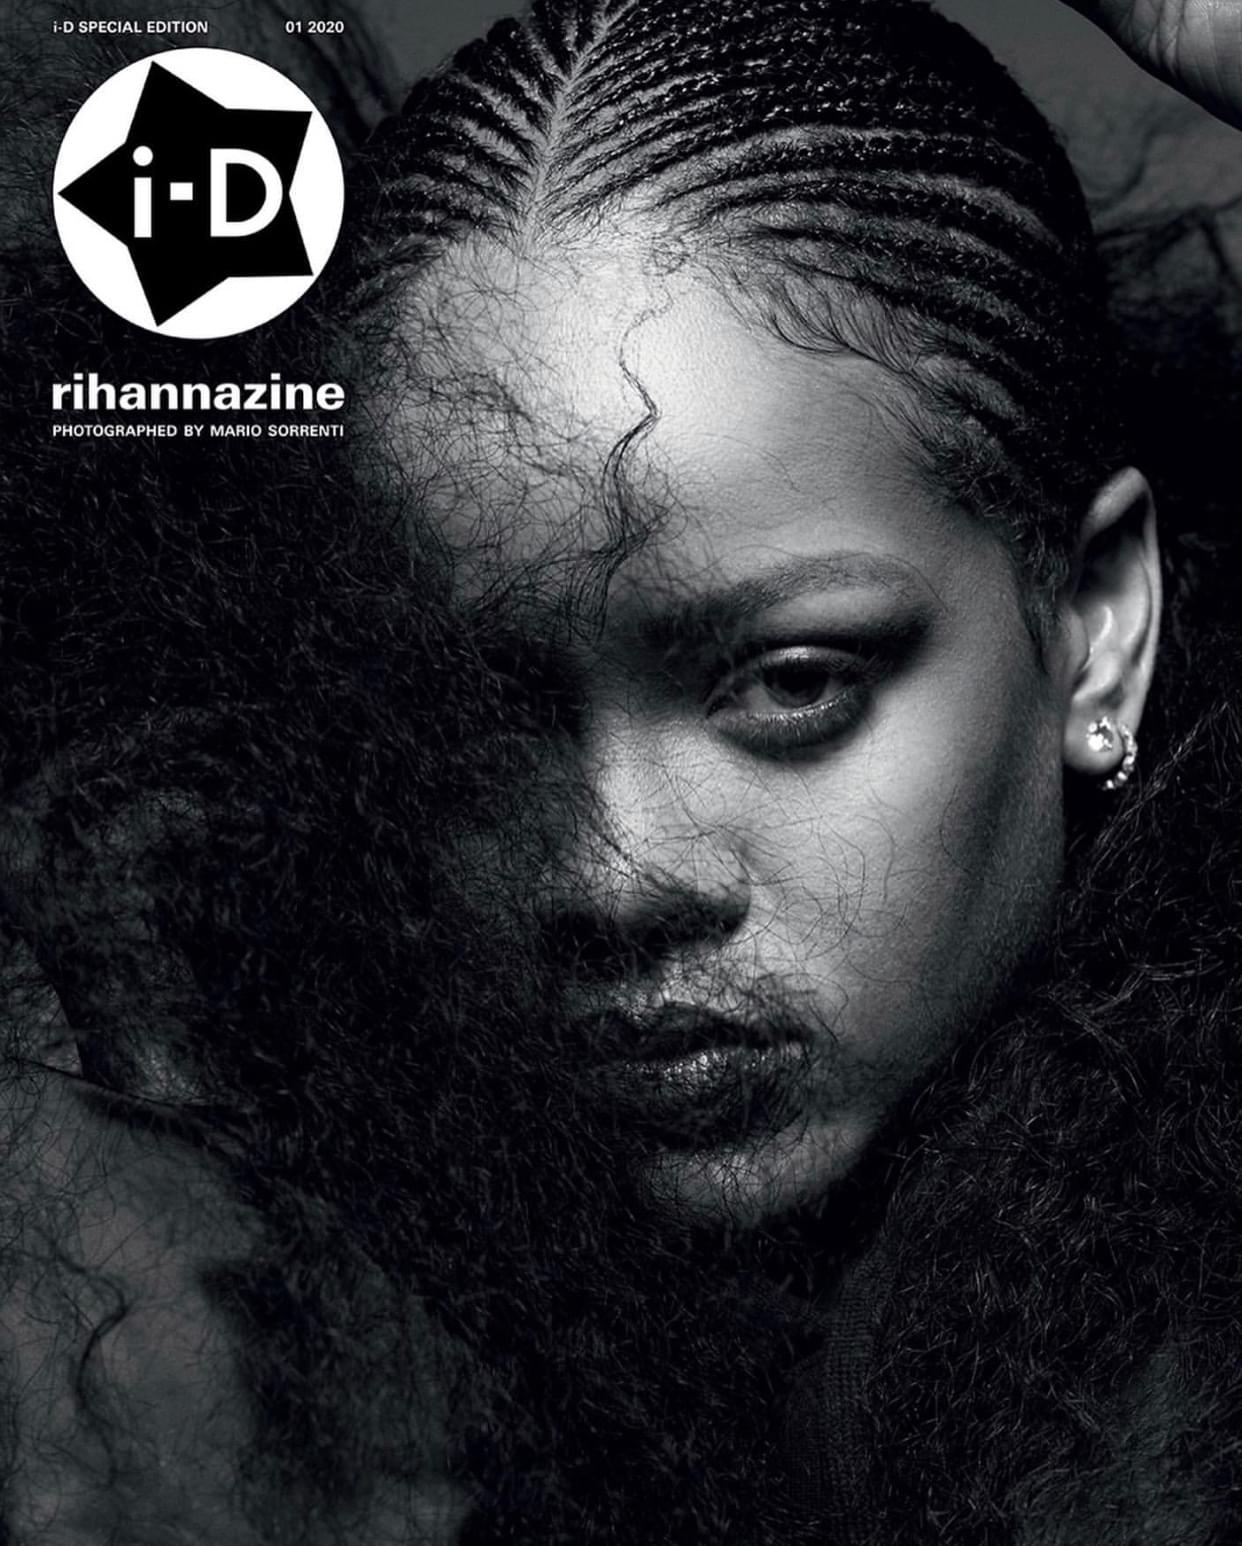 Rihanna and ‘i-D’ Collab For Their ‘Rihannazine’ Issue